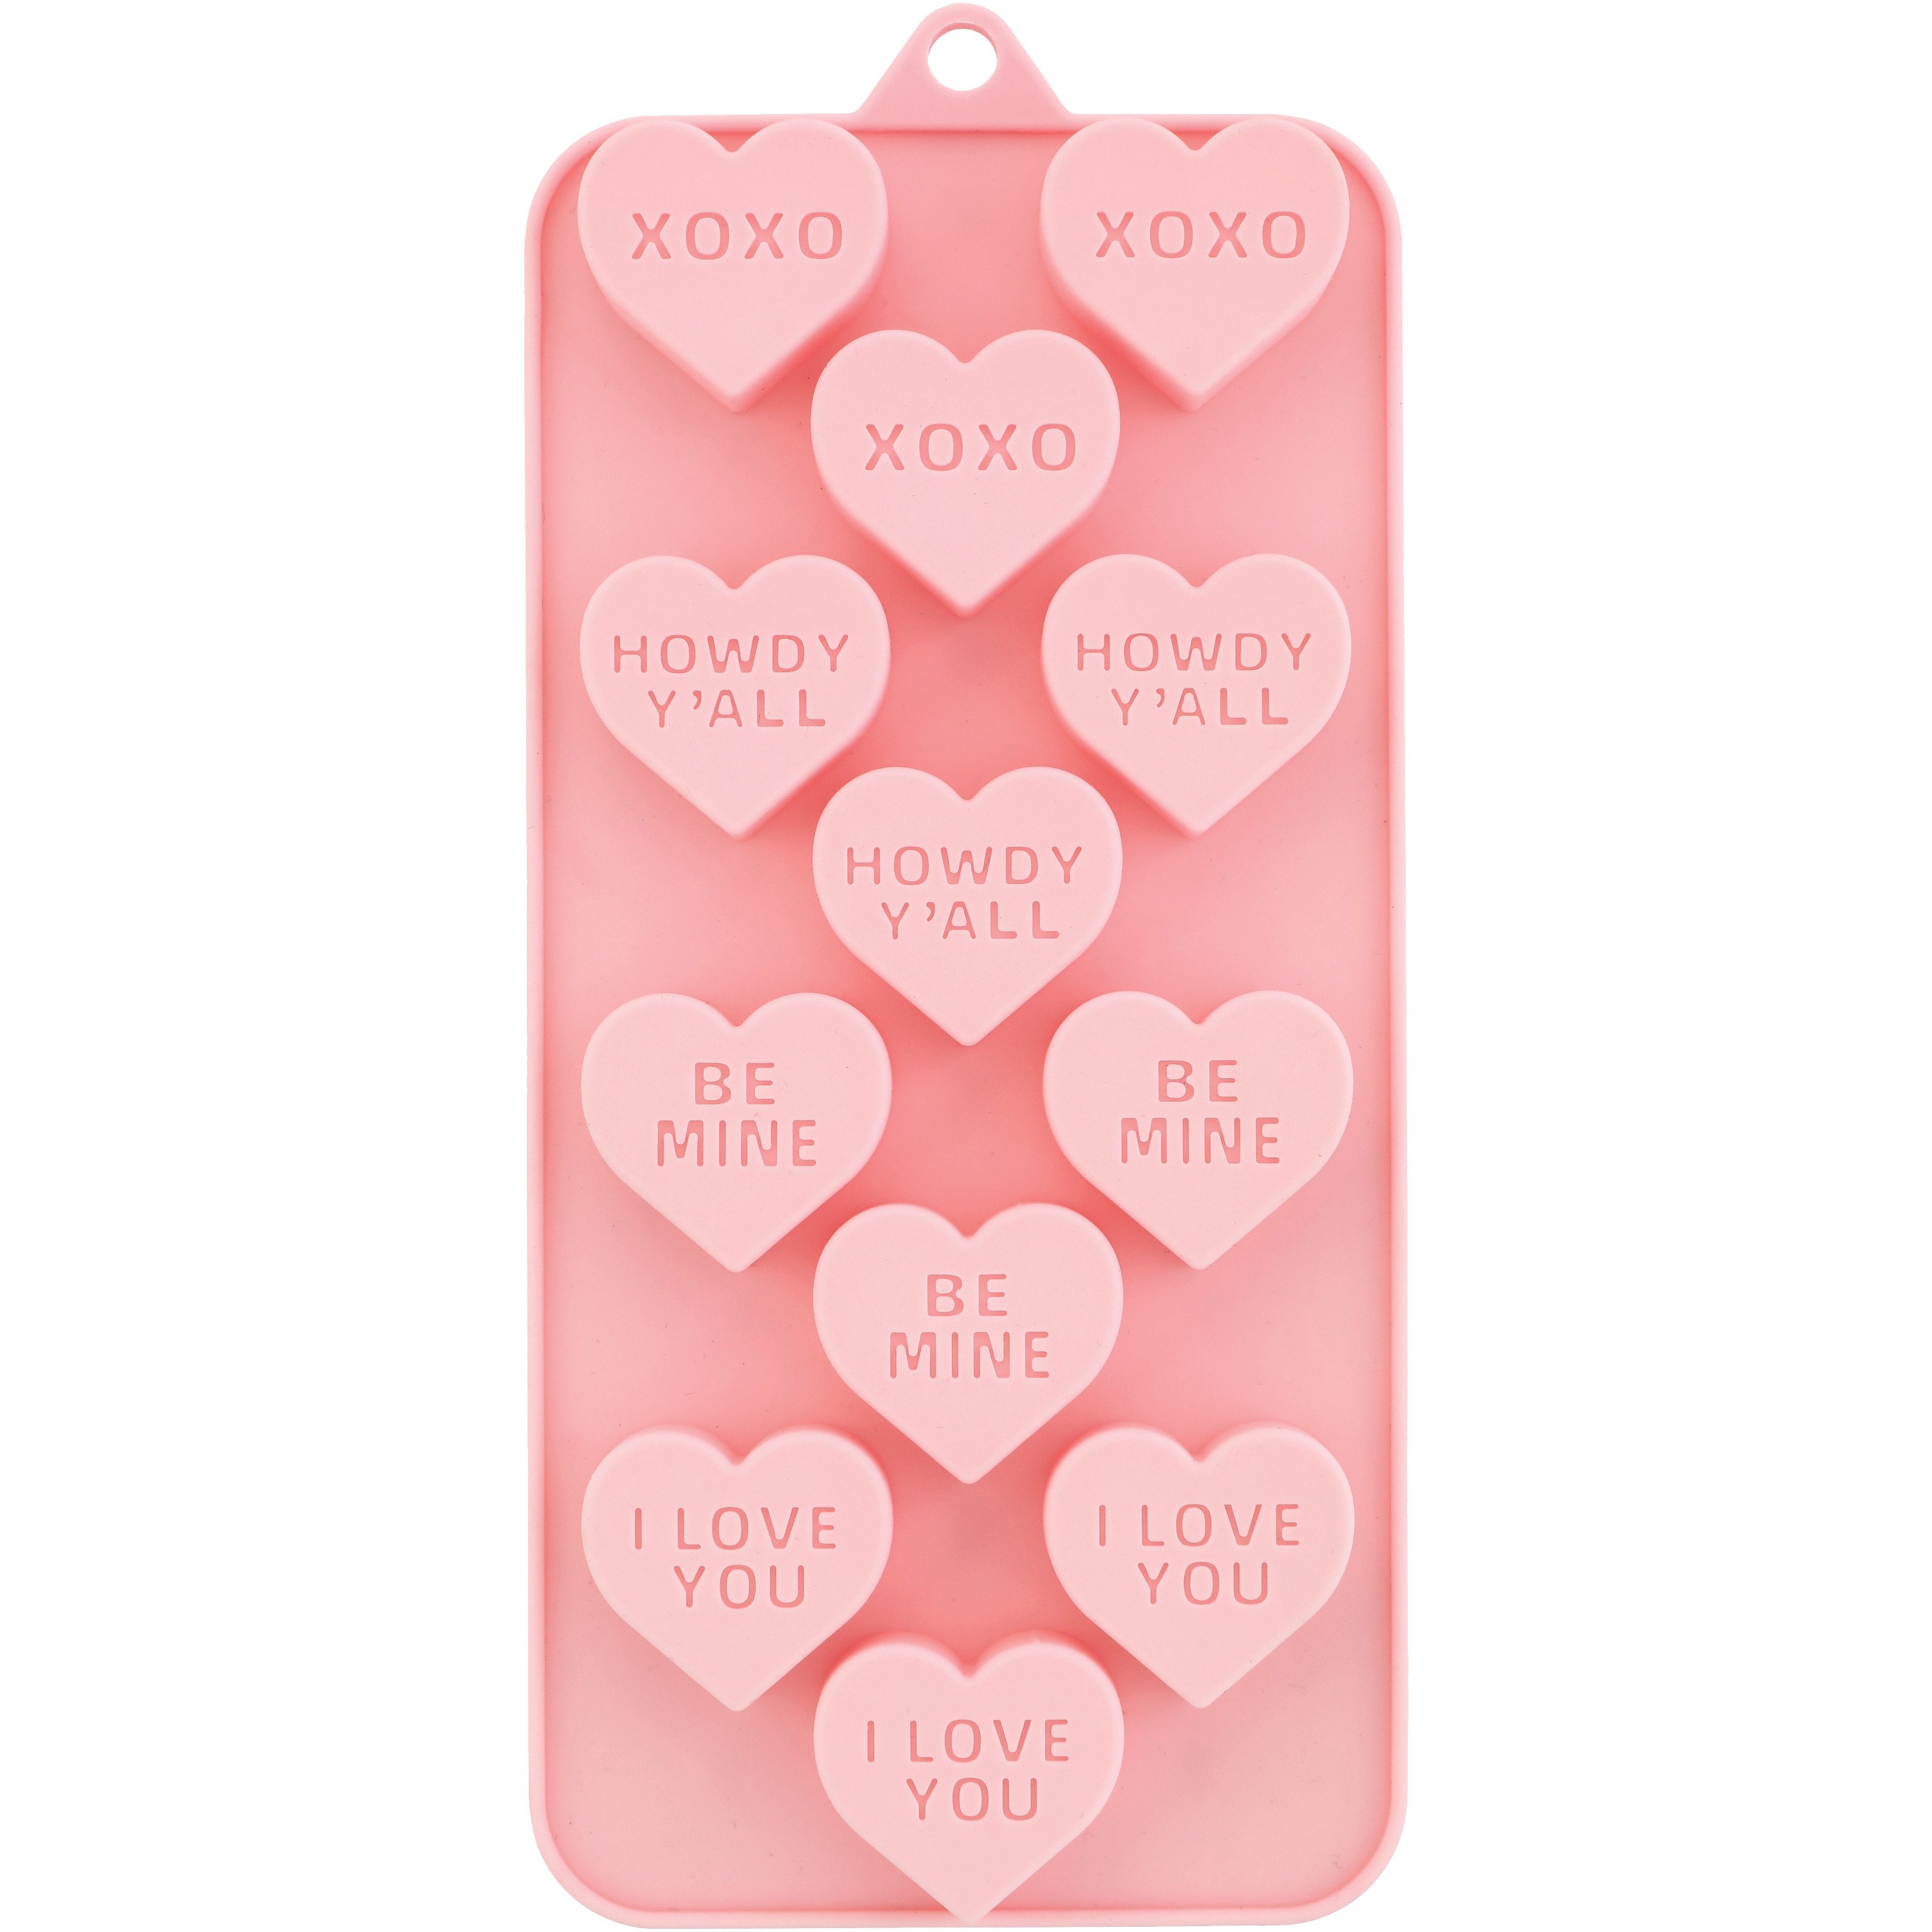 Destination Holiday Valentine's Day Heart Candy Mold - Shop Baking